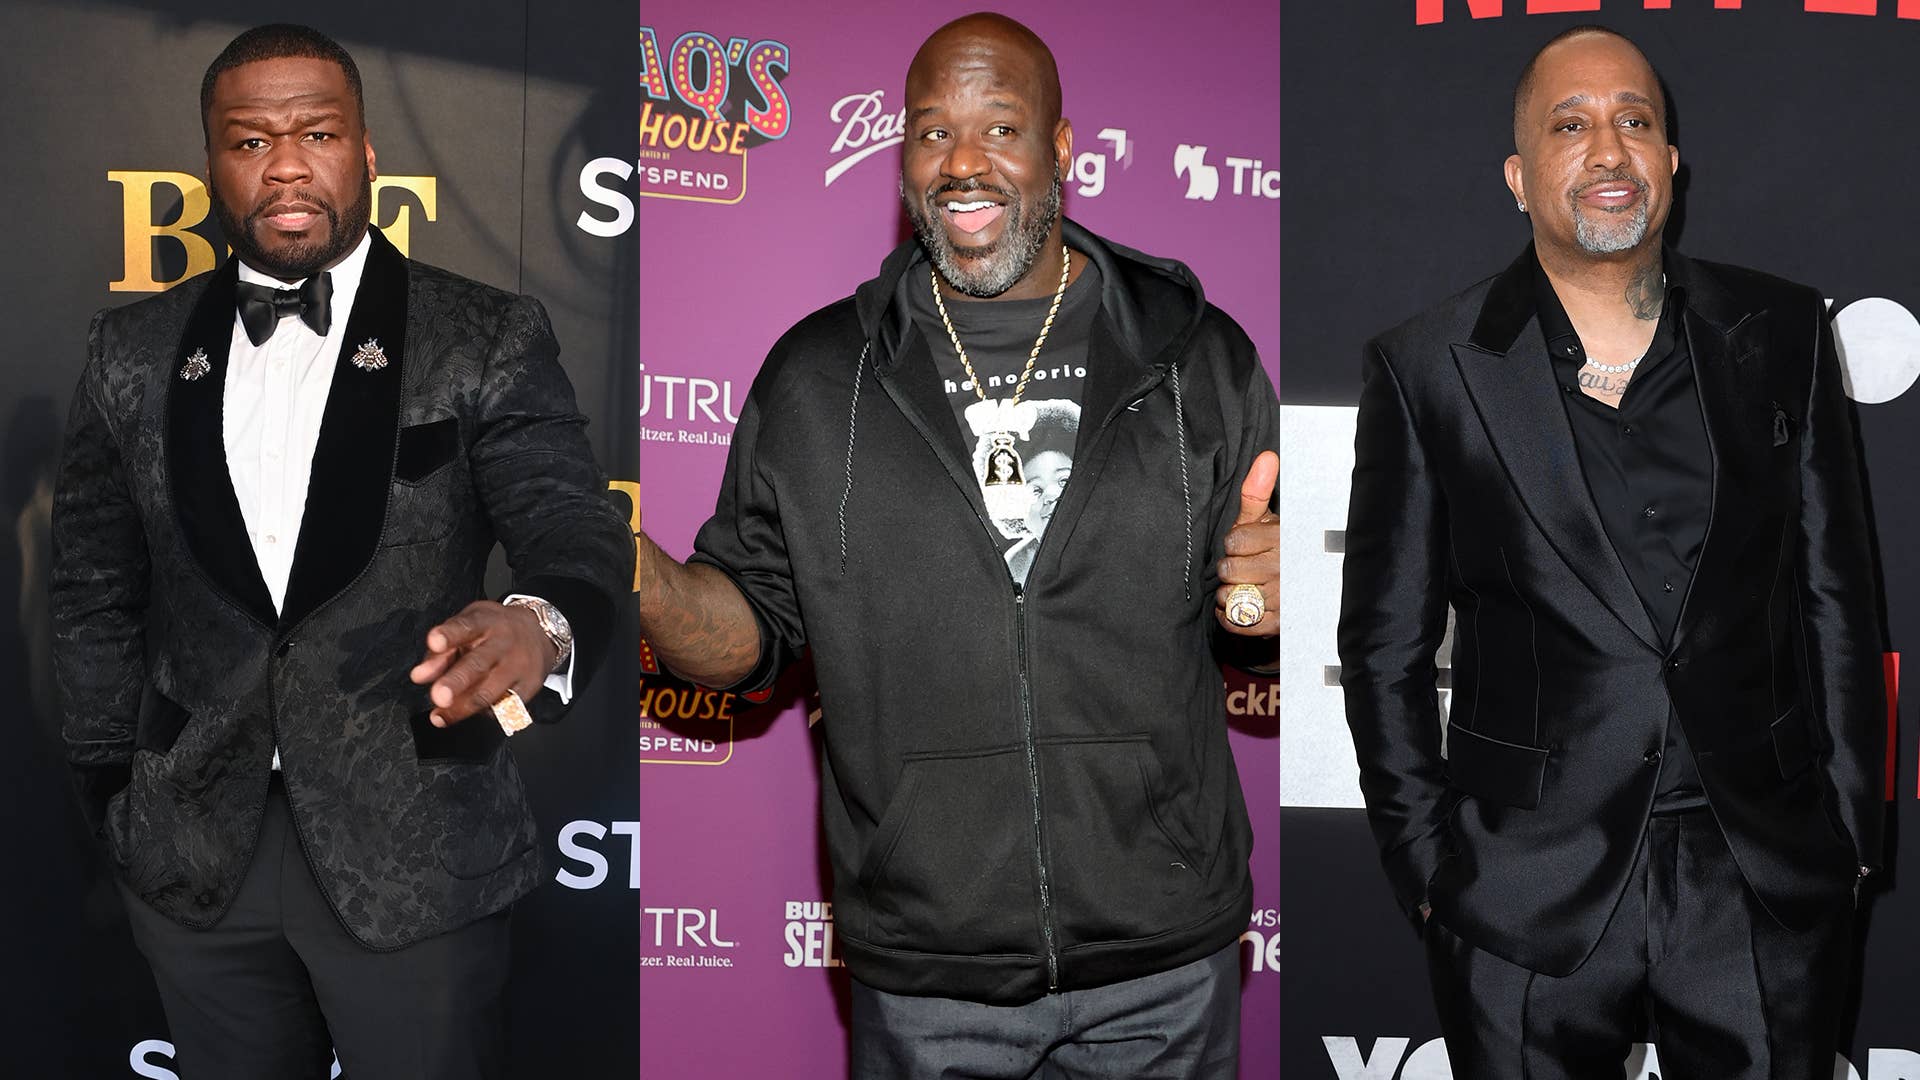 Rapper and producer 50 Cent, former NBA star Shaquille O'Neal, and producer director Kenya Barris